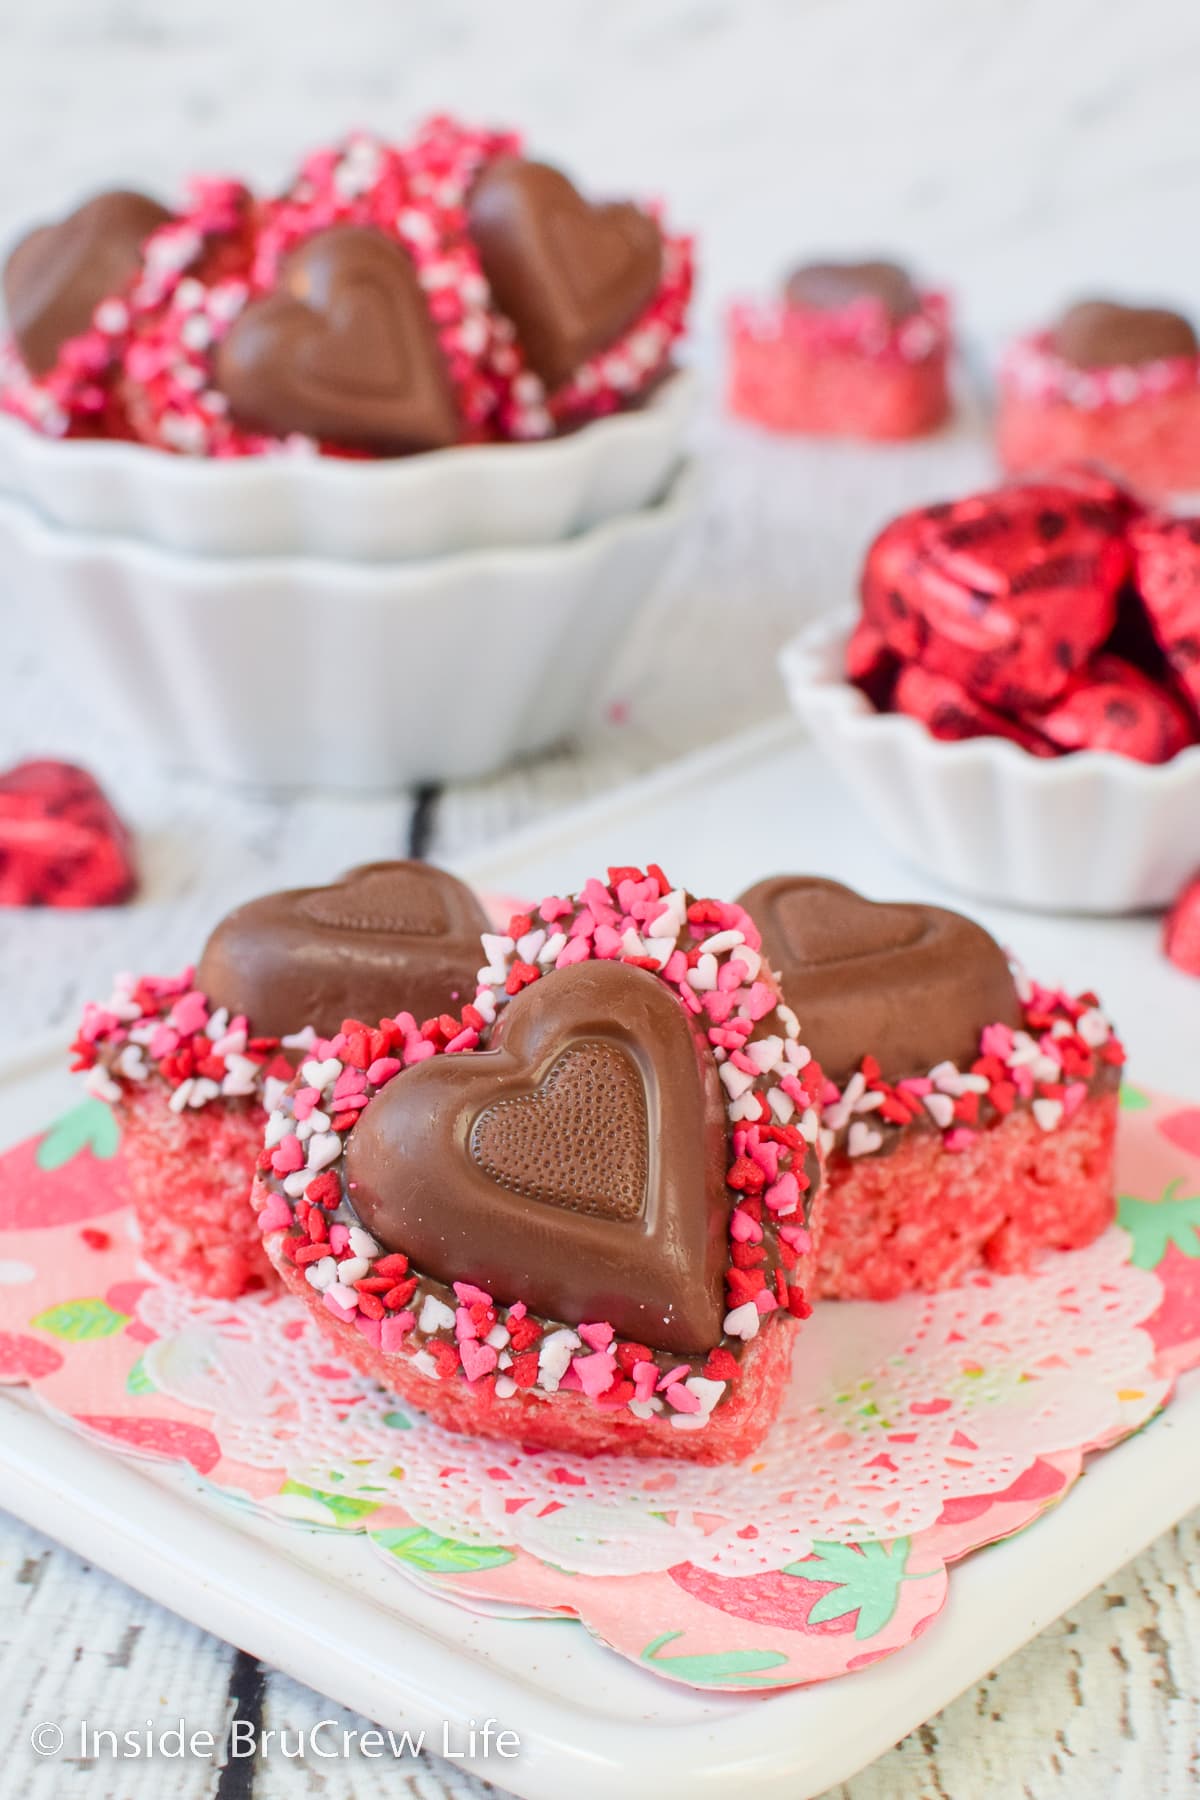 Pink rice krispie treat hearts with chocolate hearts on a white tray.